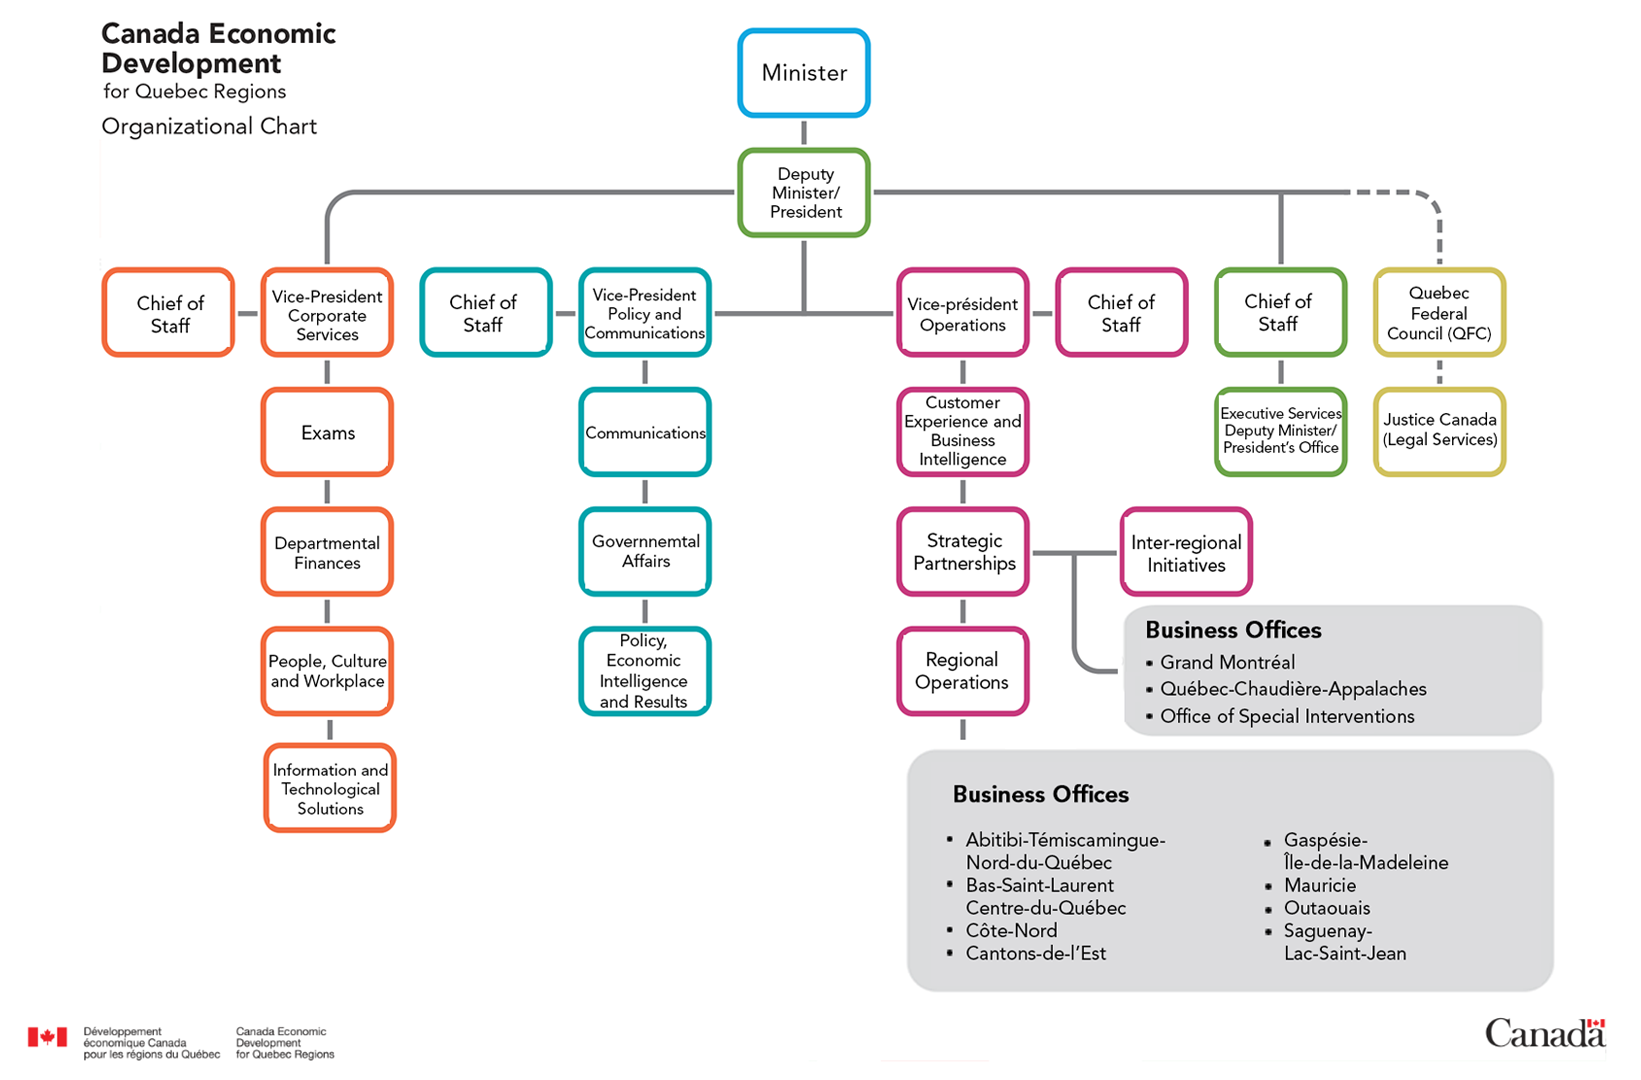 An organizational chart outlining CED’s organizational structure. At the top of the chart is the position of Minister, followed by Deputy Minister/President. In addition to her office’s Executive Services, three vice presidents come under the supervision of the Deputy Minister/President: Corporate Services, Policy and Communications, and Operations. Each of these four administrative units has a chief of staff. Under Corporate Services, there are five directorates: Exams; Departmental Finances; People, Culture and Workplace; Incubator; and Information and Technological Solutions. Under Policy and Communications, there are three directorates: Communications, Governmental Affairs, and Policy, Economic Intelligence and Results. Within the Operations Sector, there are several directorates: Customer Experience and Business Intelligence, Strategic Partnerships, Inter-regional Initiatives and Regional Operations. The business offices of Abitibi-Témiscamingue–Nord-du-Québec, Bas-St-Laurent, Centre-du-Québec, Côte-Nord, Cantons-de-l’Est, Gaspésie–Îles-de-la-Madeleine, Mauricie, Outaouais and Saguenay–Lac-St-Jean fall under Regional Operations, while the business offices of Grand Montréal and Québec–Chaudière-Appalaches fall jointly under Strategic Partnerships and Inter-regional Initiatives. Through the Quebec Federal Council (QFC), CED collaborates with other federal departments with a presence in Quebec and also relies on the services of Justice Canada (for its Legal Services).